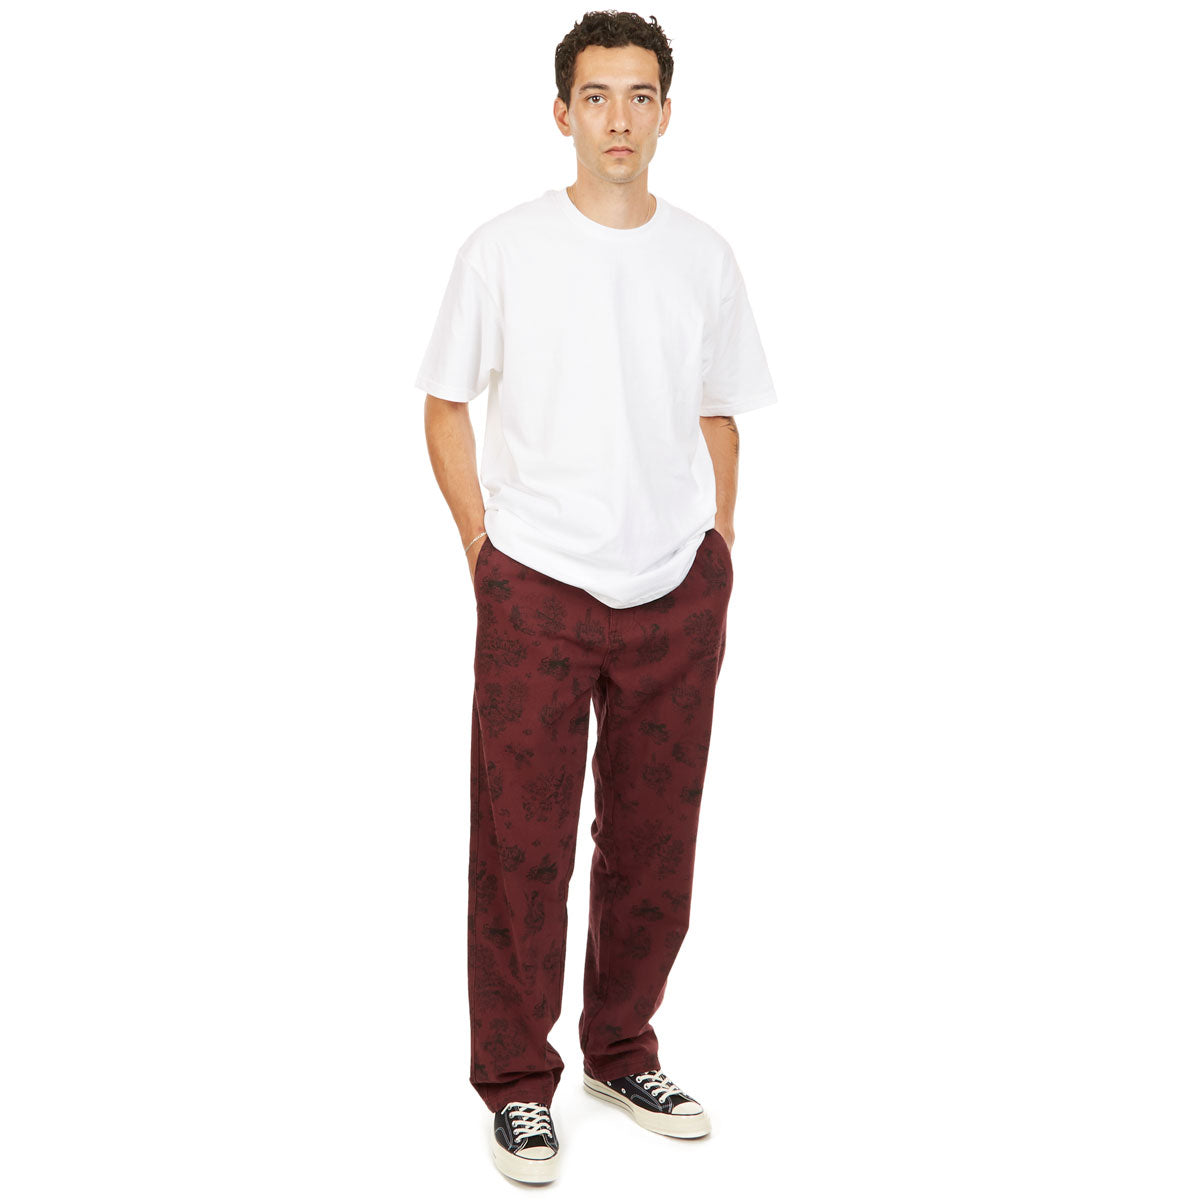 CCS Original Relaxed Toile Chino Pants - Oxblood image 3